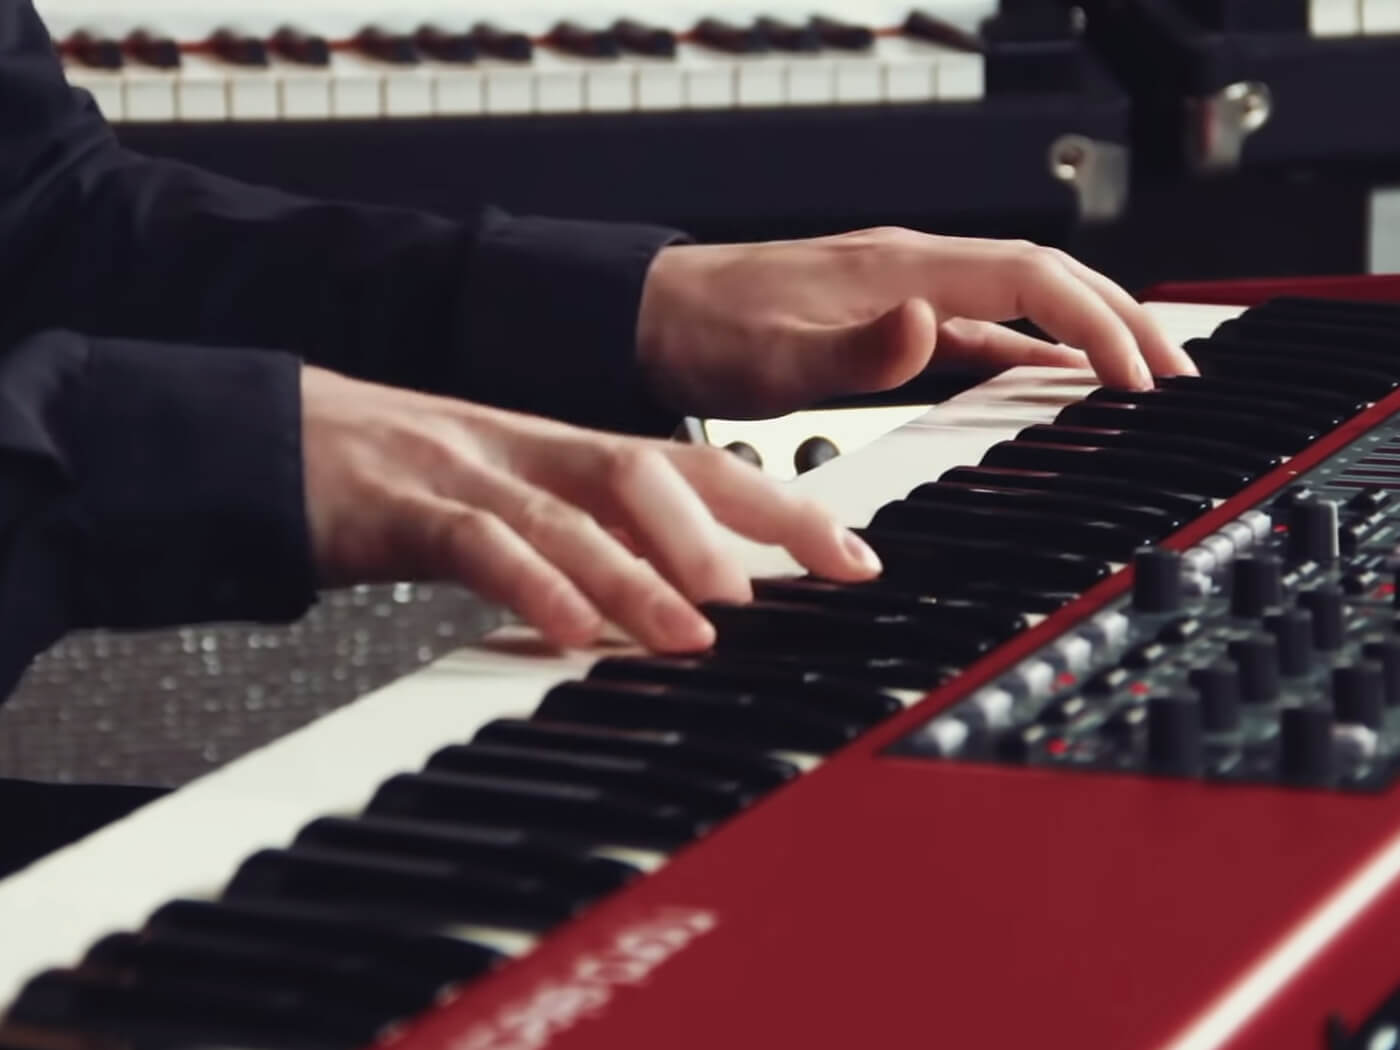 Nord Lead Synthesizer, sound synthesis